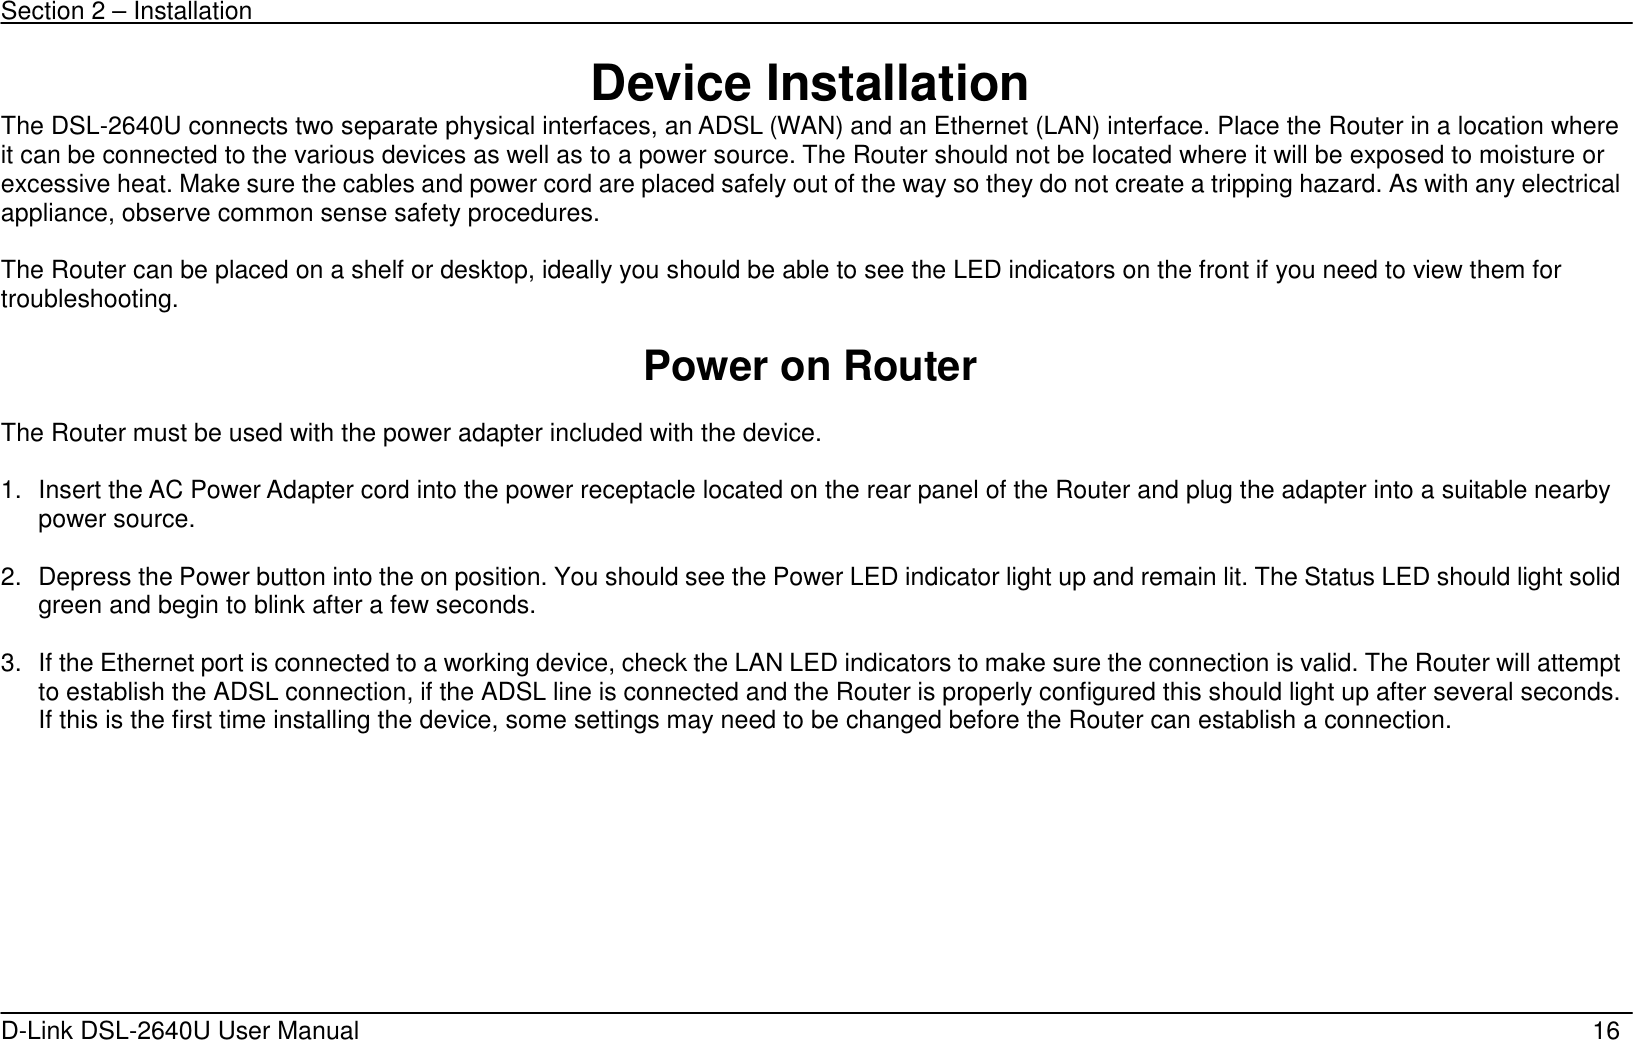 Section 2 – Installation   D-Link DSL-2640U User Manual    16 Device Installation The DSL-2640U connects two separate physical interfaces, an ADSL (WAN) and an Ethernet (LAN) interface. Place the Router in a location where it can be connected to the various devices as well as to a power source. The Router should not be located where it will be exposed to moisture or excessive heat. Make sure the cables and power cord are placed safely out of the way so they do not create a tripping hazard. As with any electrical appliance, observe common sense safety procedures.  The Router can be placed on a shelf or desktop, ideally you should be able to see the LED indicators on the front if you need to view them for troubleshooting.  Power on Router  The Router must be used with the power adapter included with the device.  1.  Insert the AC Power Adapter cord into the power receptacle located on the rear panel of the Router and plug the adapter into a suitable nearby power source.  2.  Depress the Power button into the on position. You should see the Power LED indicator light up and remain lit. The Status LED should light solid green and begin to blink after a few seconds.  3.  If the Ethernet port is connected to a working device, check the LAN LED indicators to make sure the connection is valid. The Router will attempt to establish the ADSL connection, if the ADSL line is connected and the Router is properly configured this should light up after several seconds. If this is the first time installing the device, some settings may need to be changed before the Router can establish a connection.    